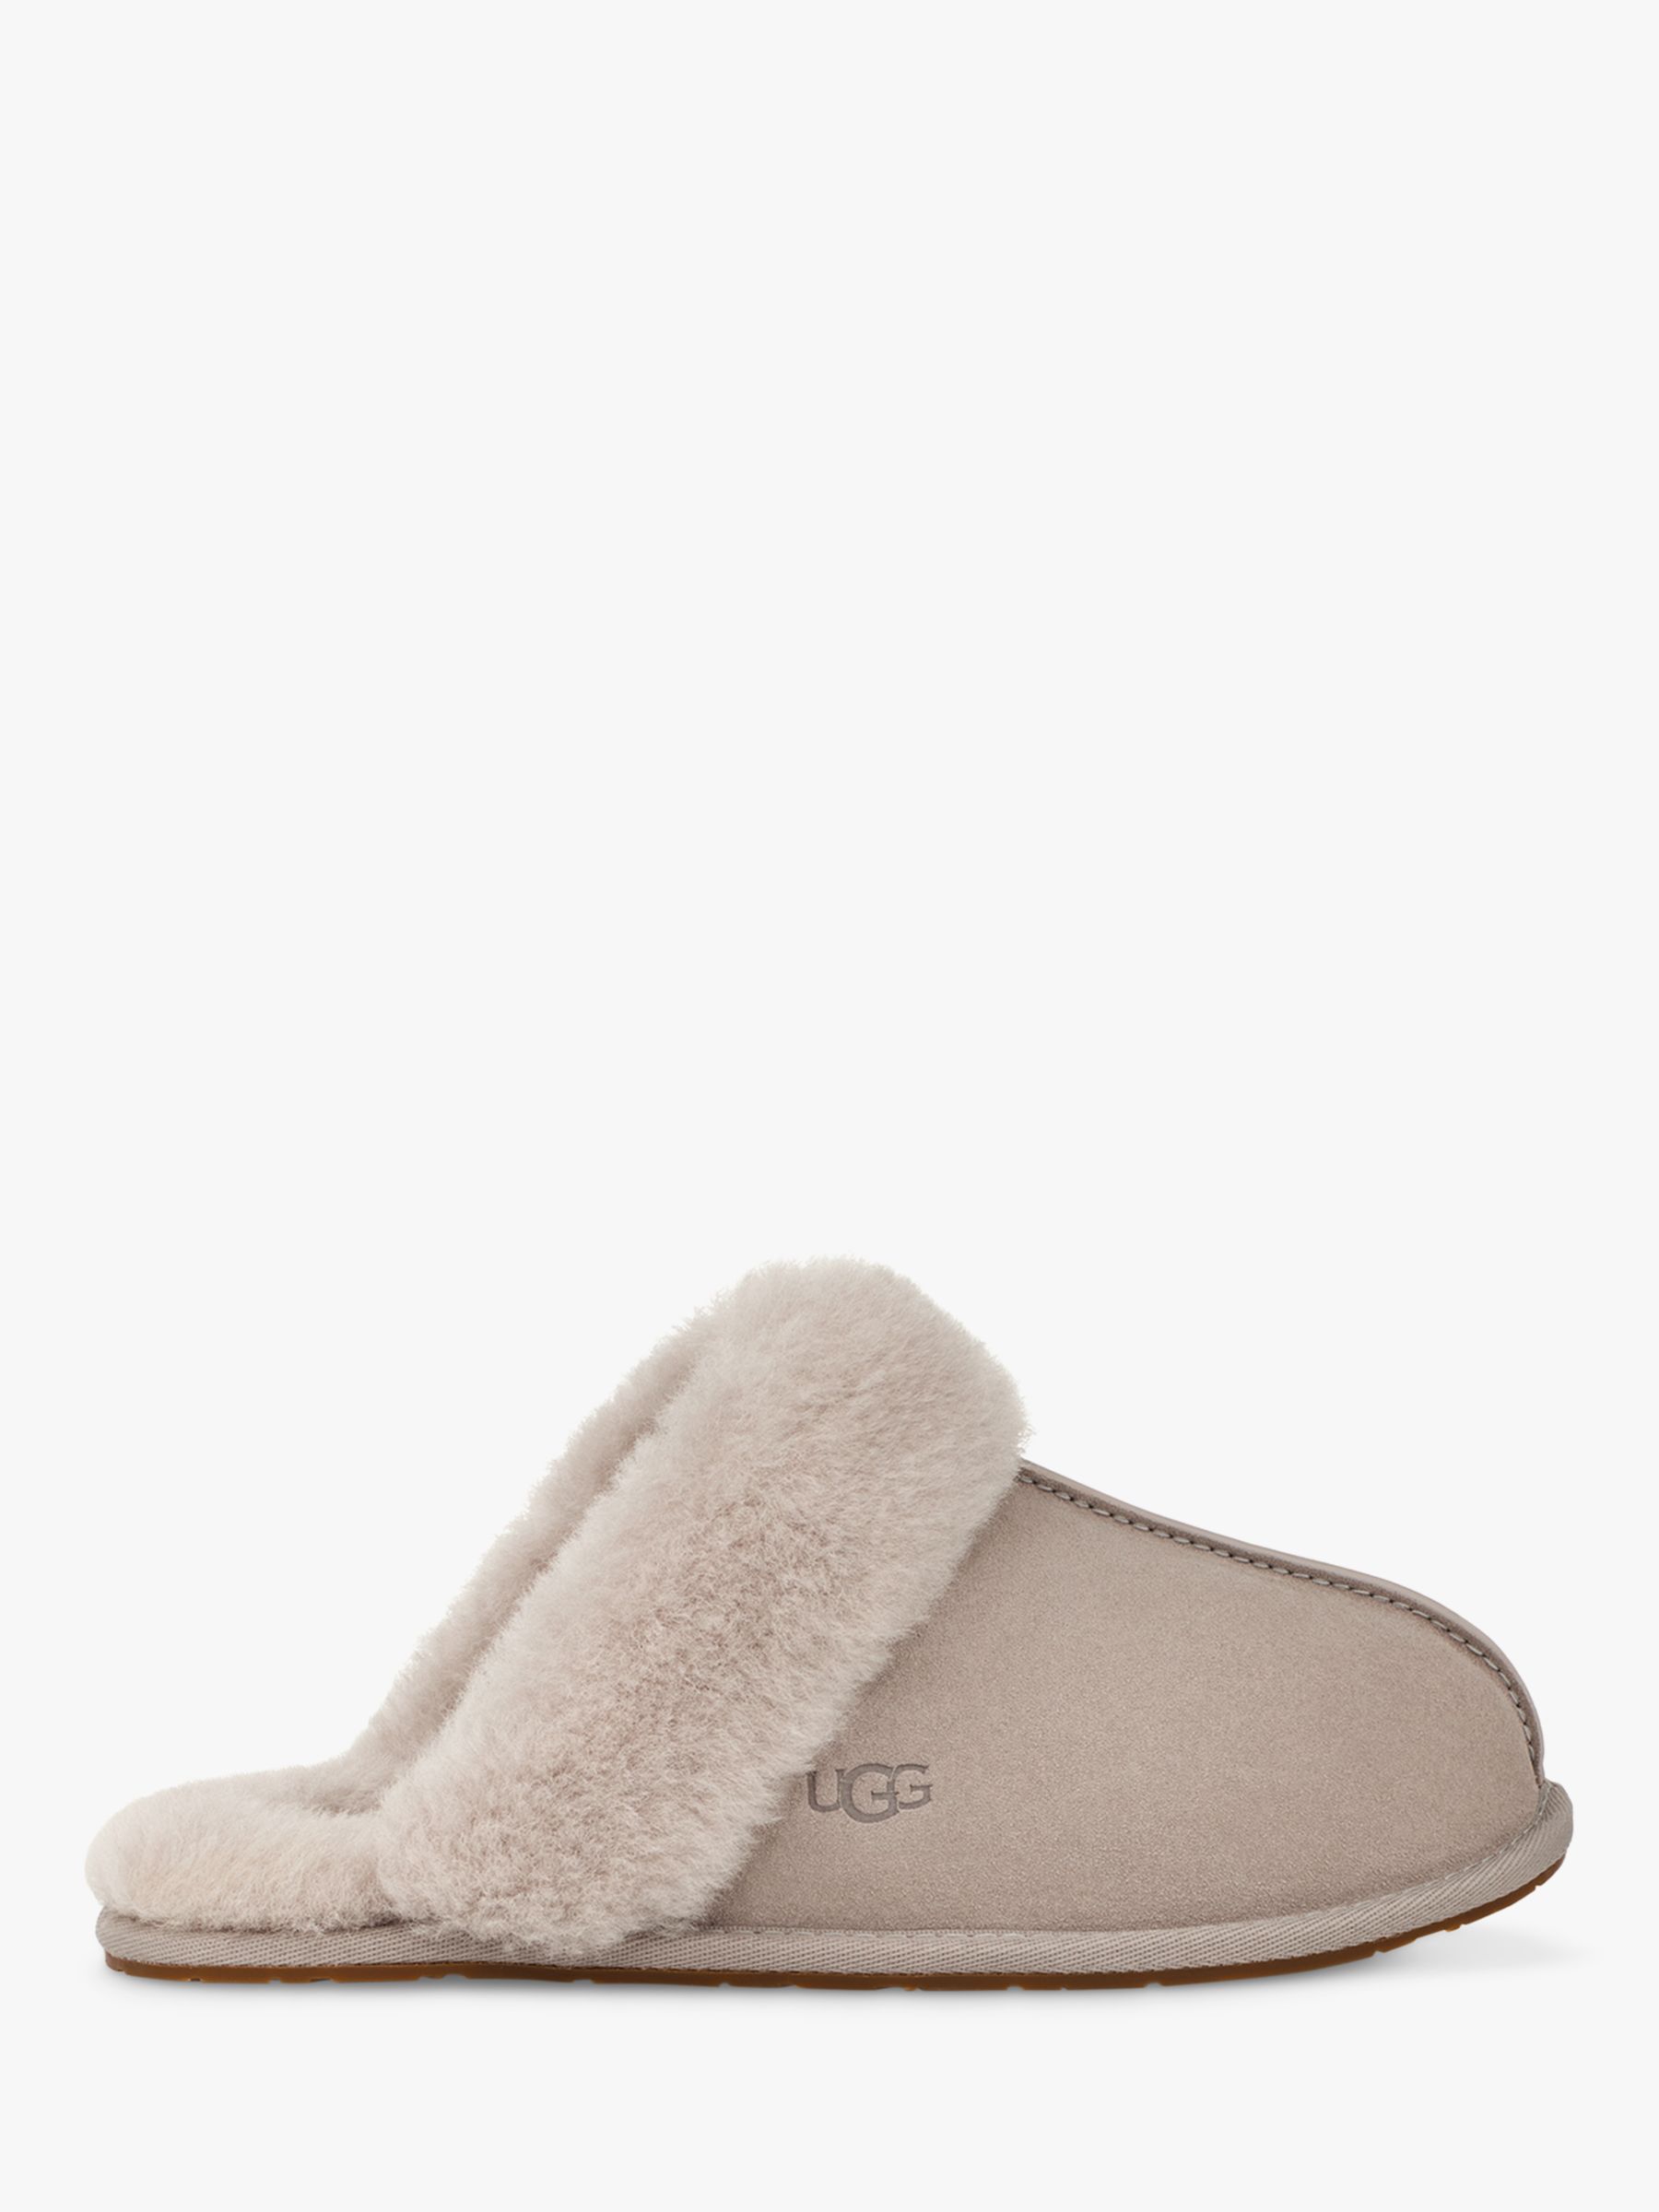 UGG Scuffette Sheepskin and Suede Slippers, Campfire at John Lewis ...